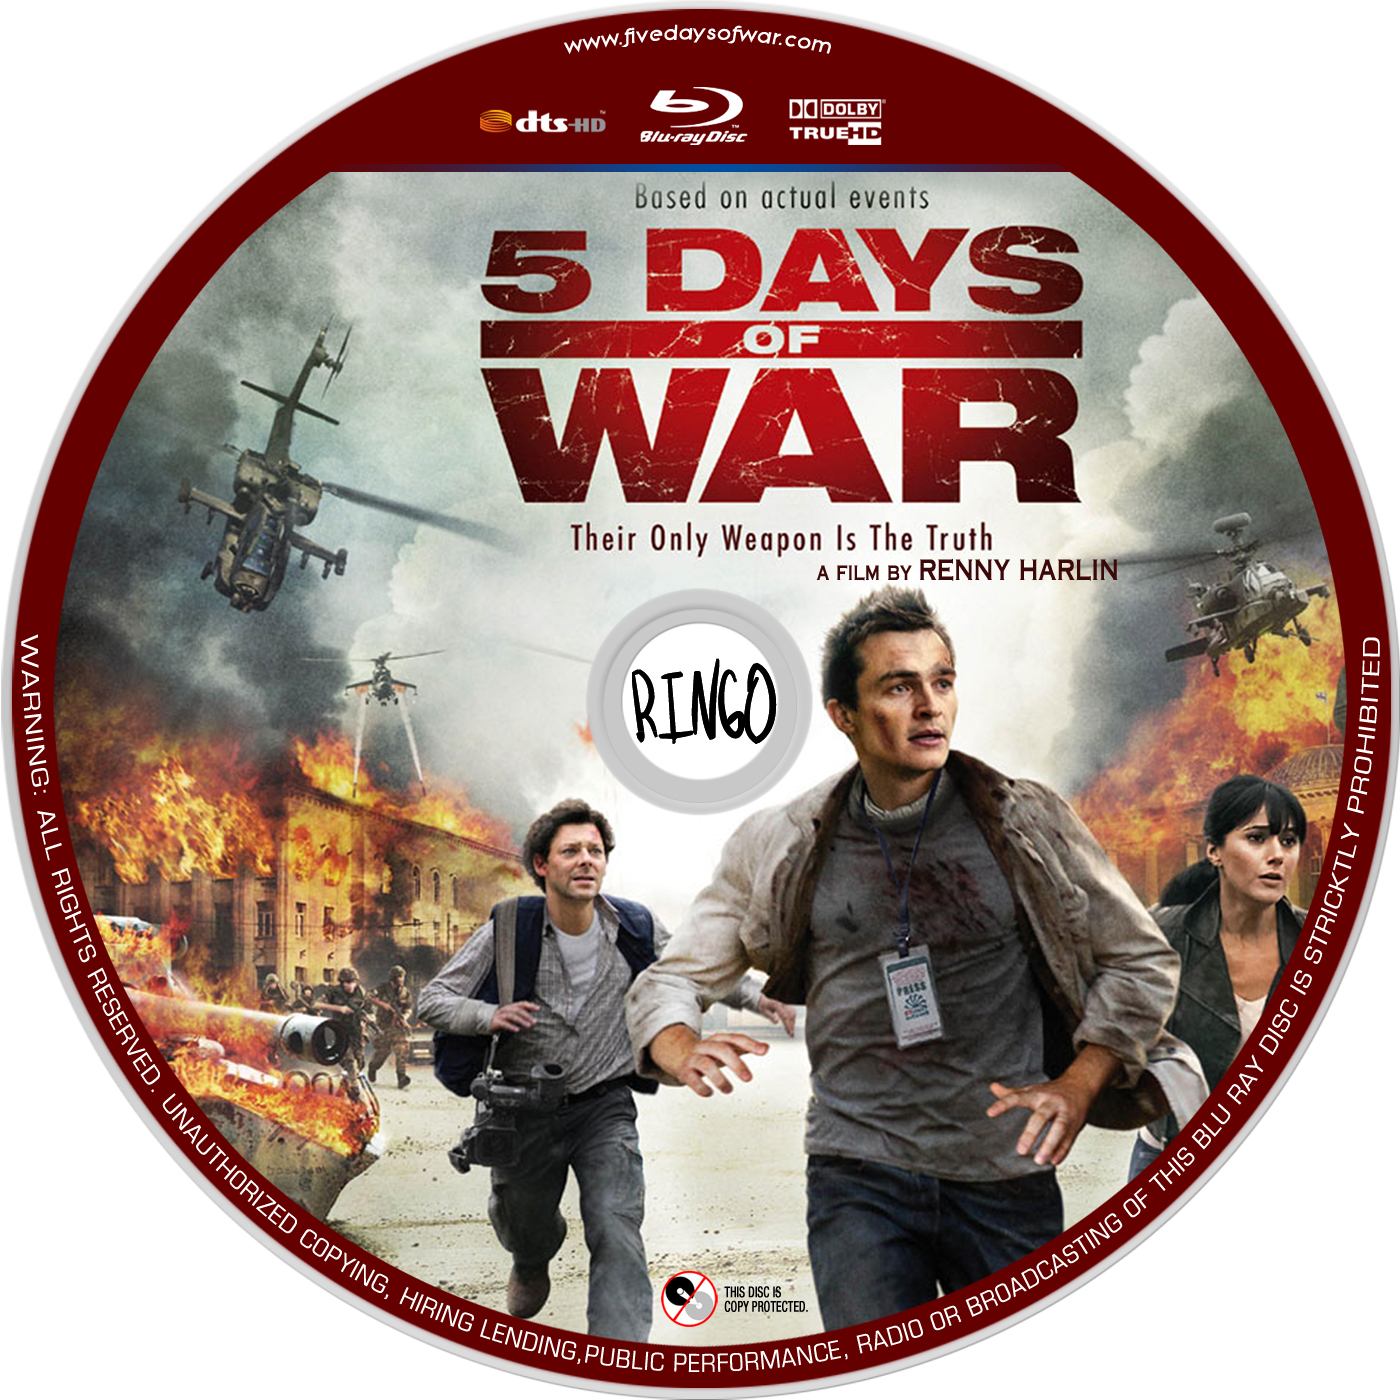 Covers Box Sk 5 Days Of War High Quality Dvd Blueray Movie